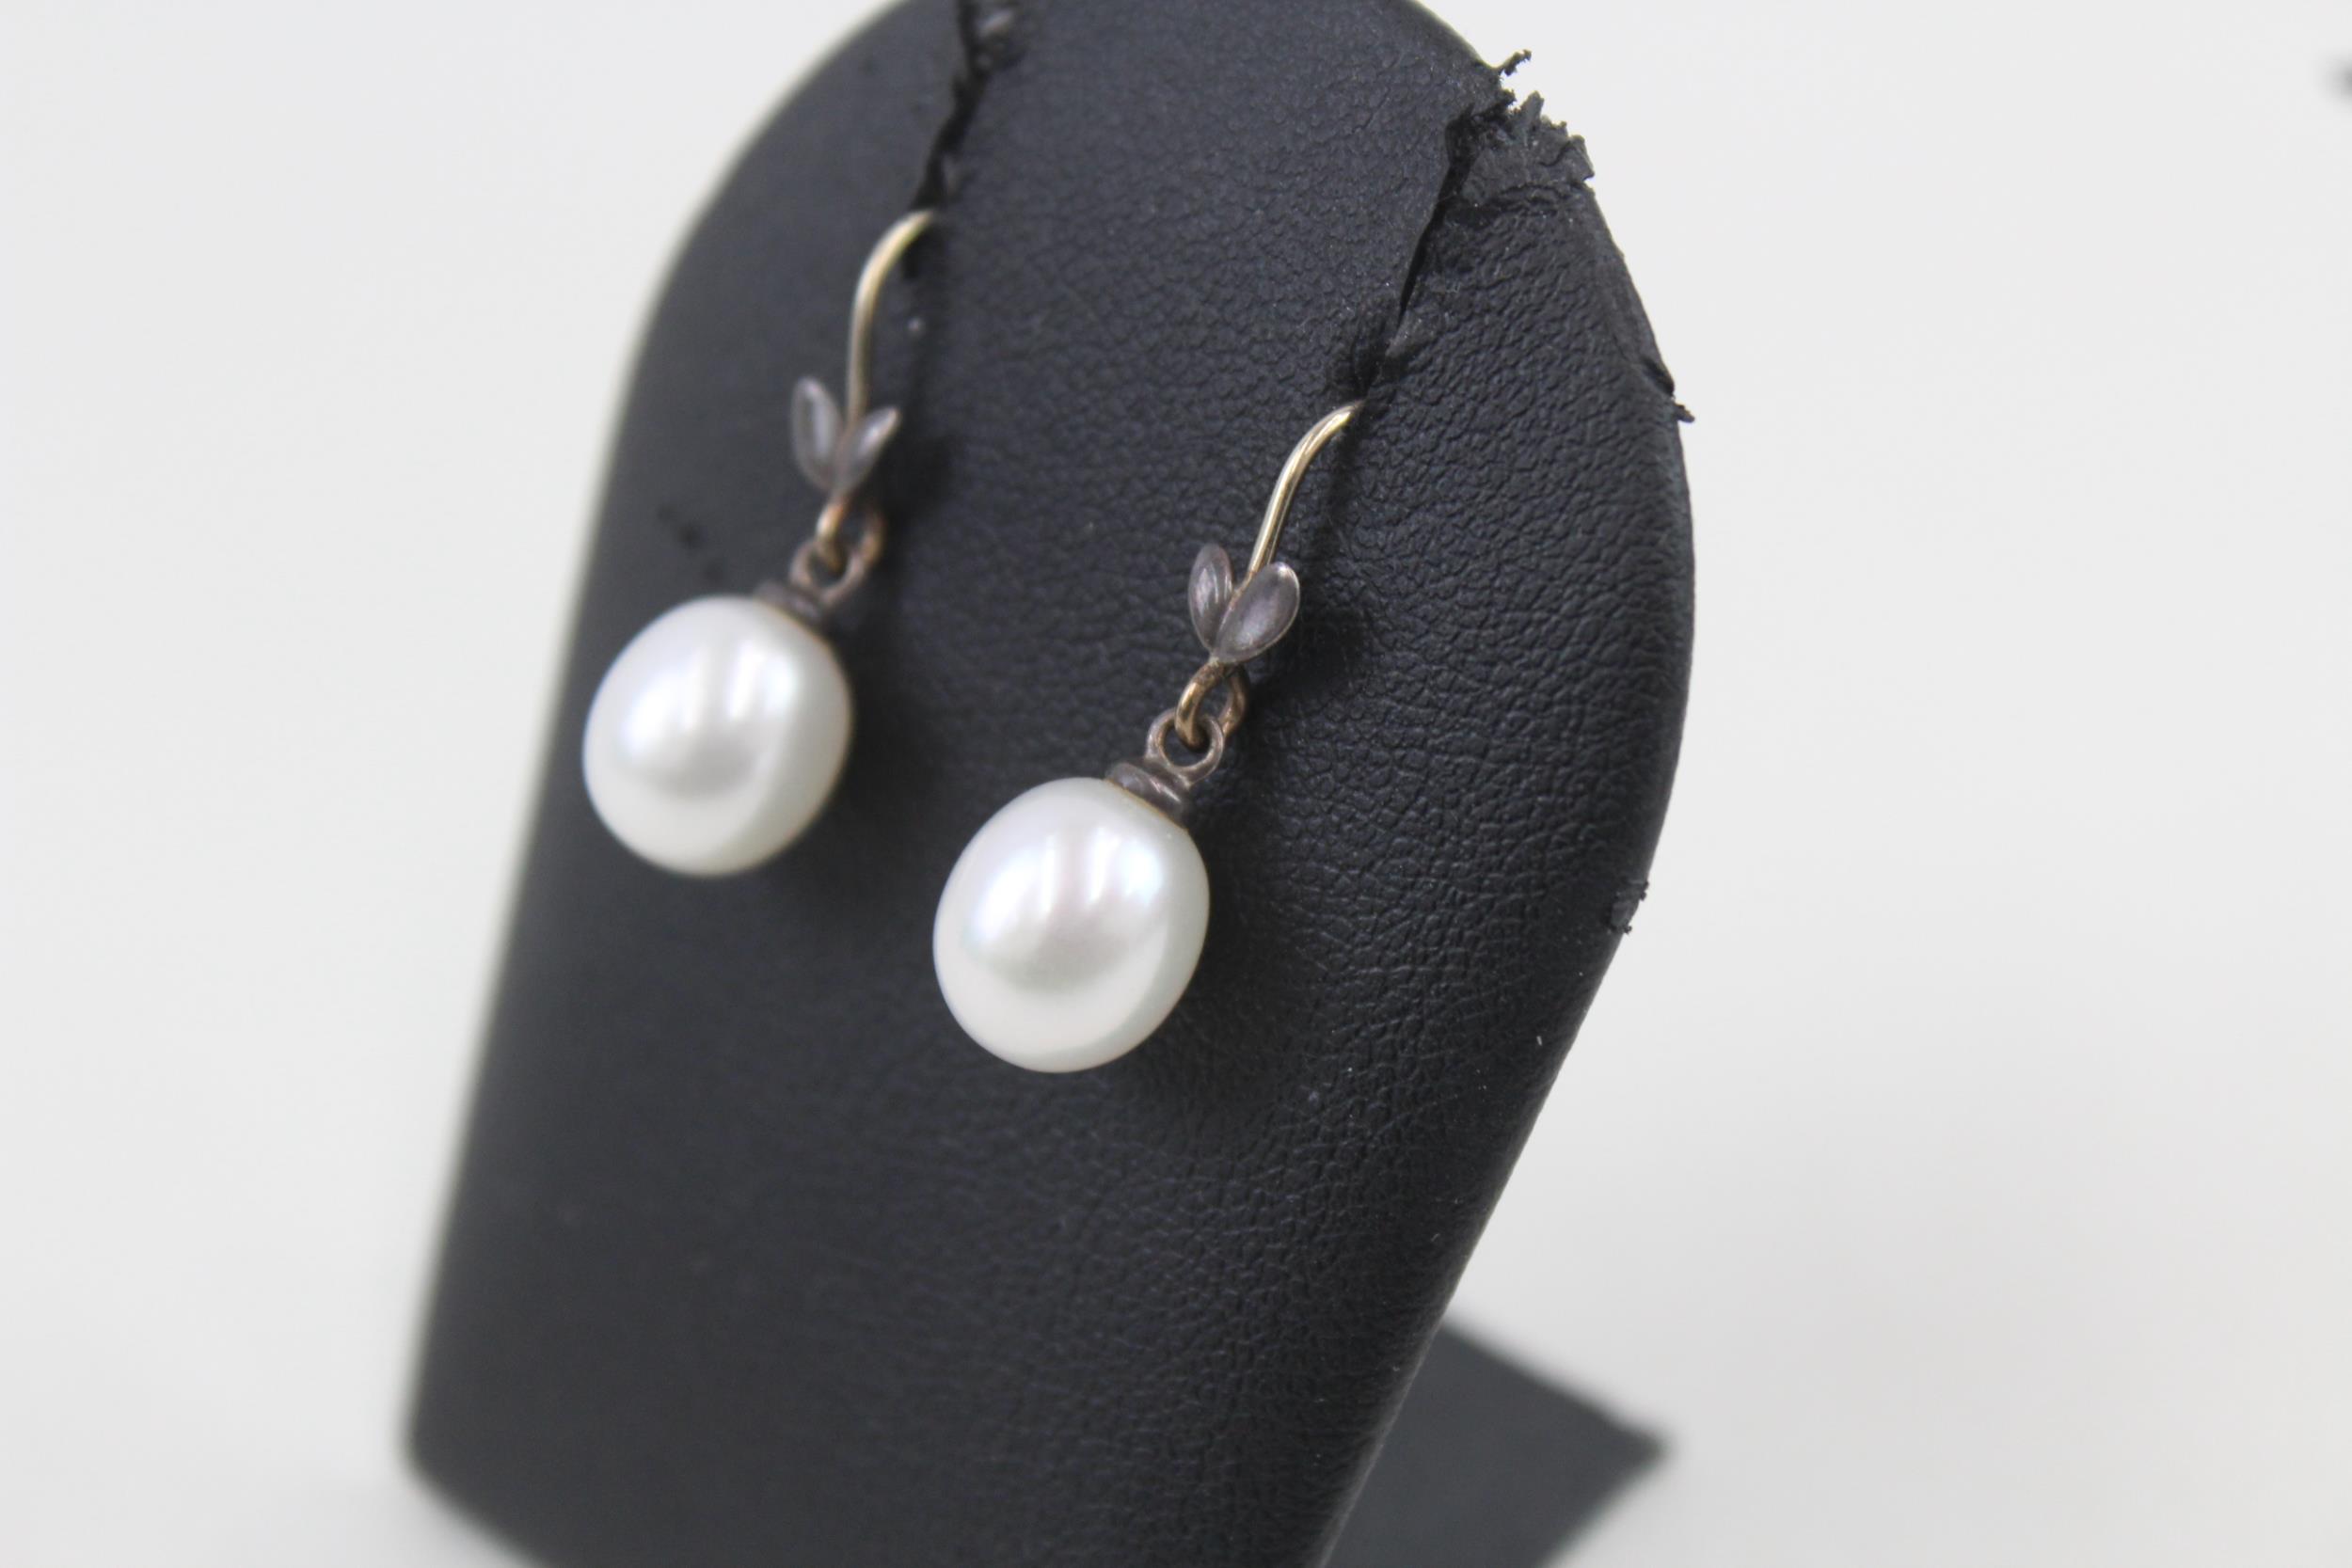 Pair of silver cultured pearl drop earrings by designer Tiffany & Co (3g) - Image 4 of 6